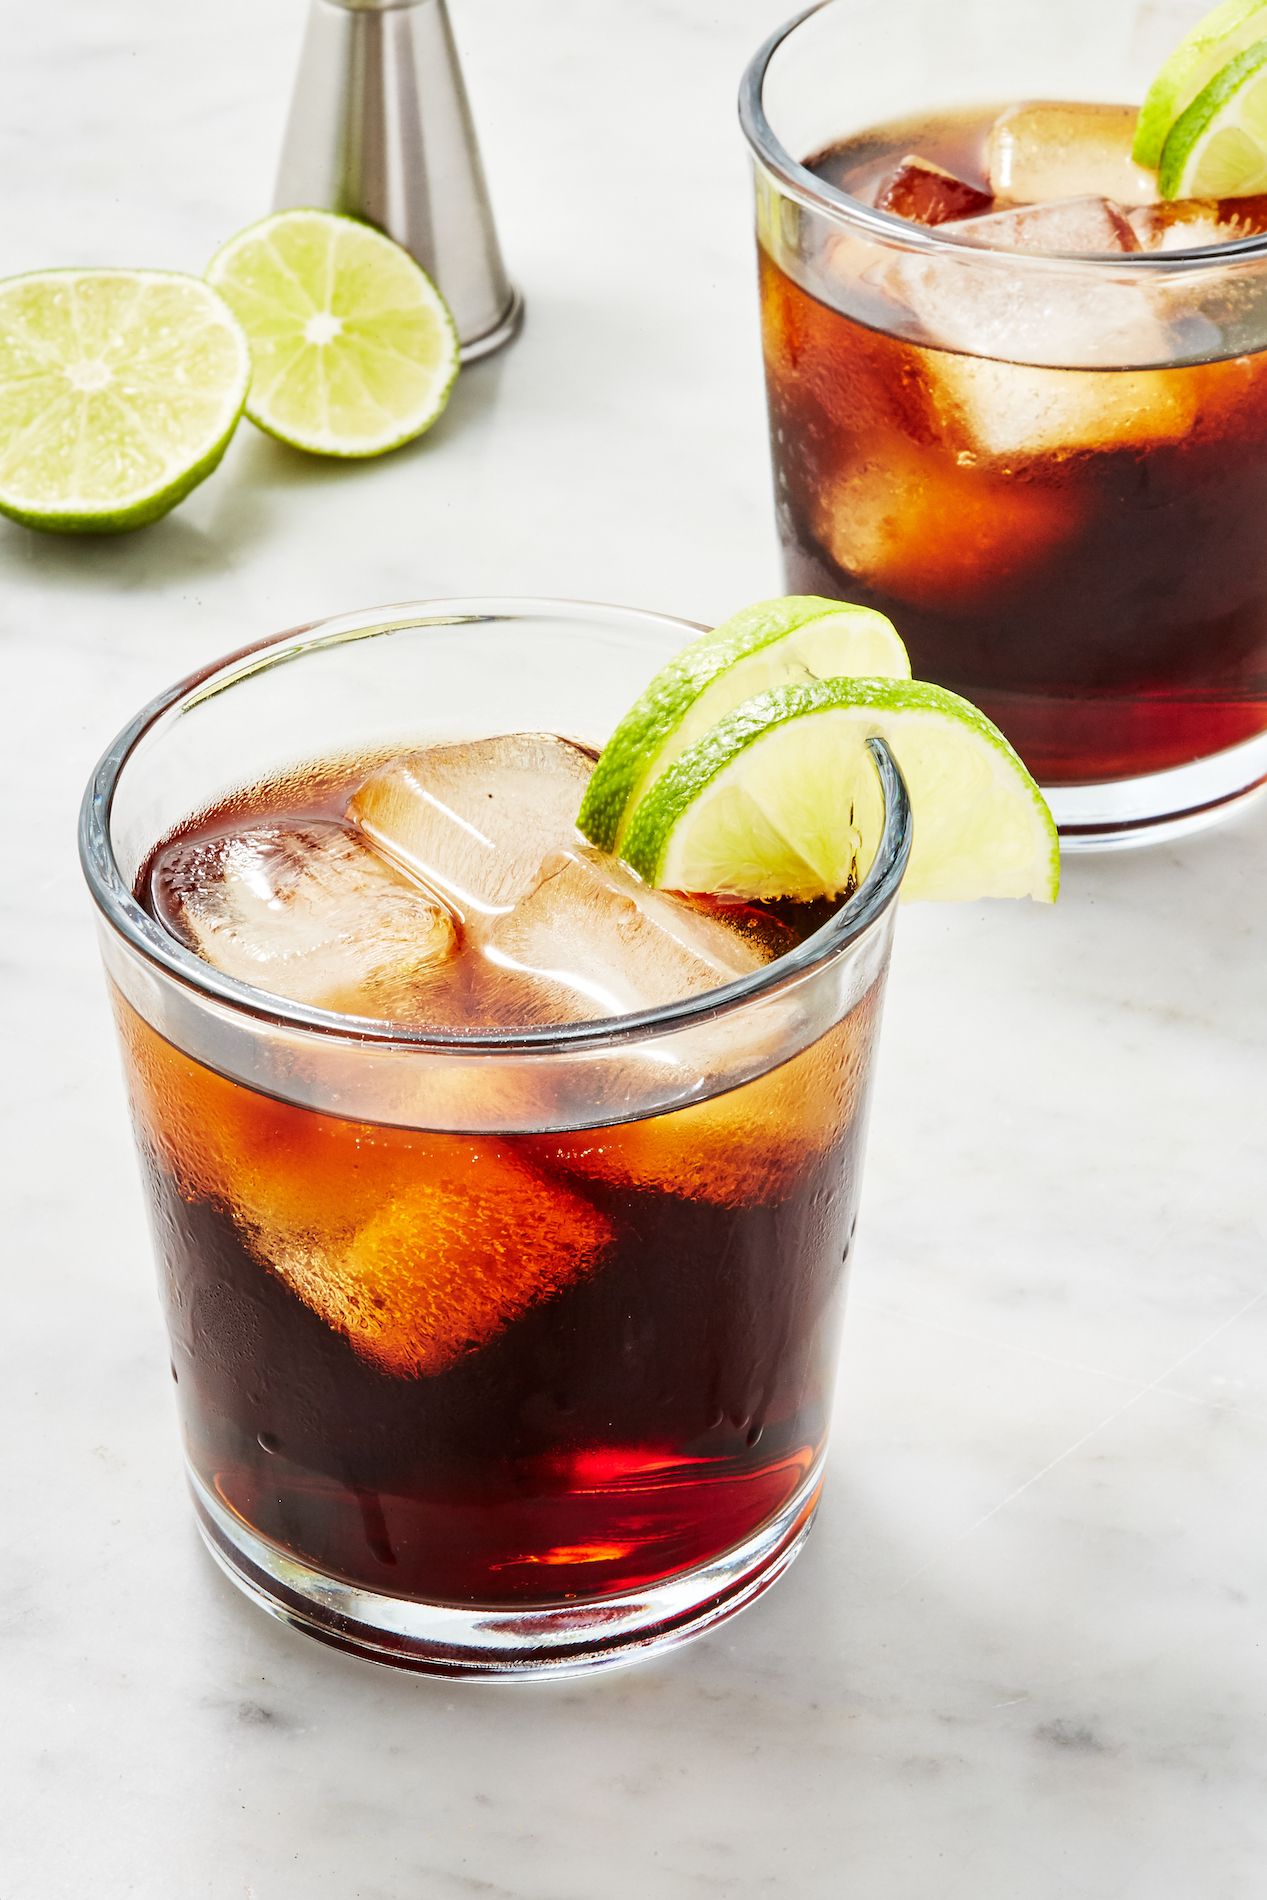 25 Best Rum Cocktails Easy Rum Mixed Drink Recipes For Summer,Country Ribs In Oven Then Grill